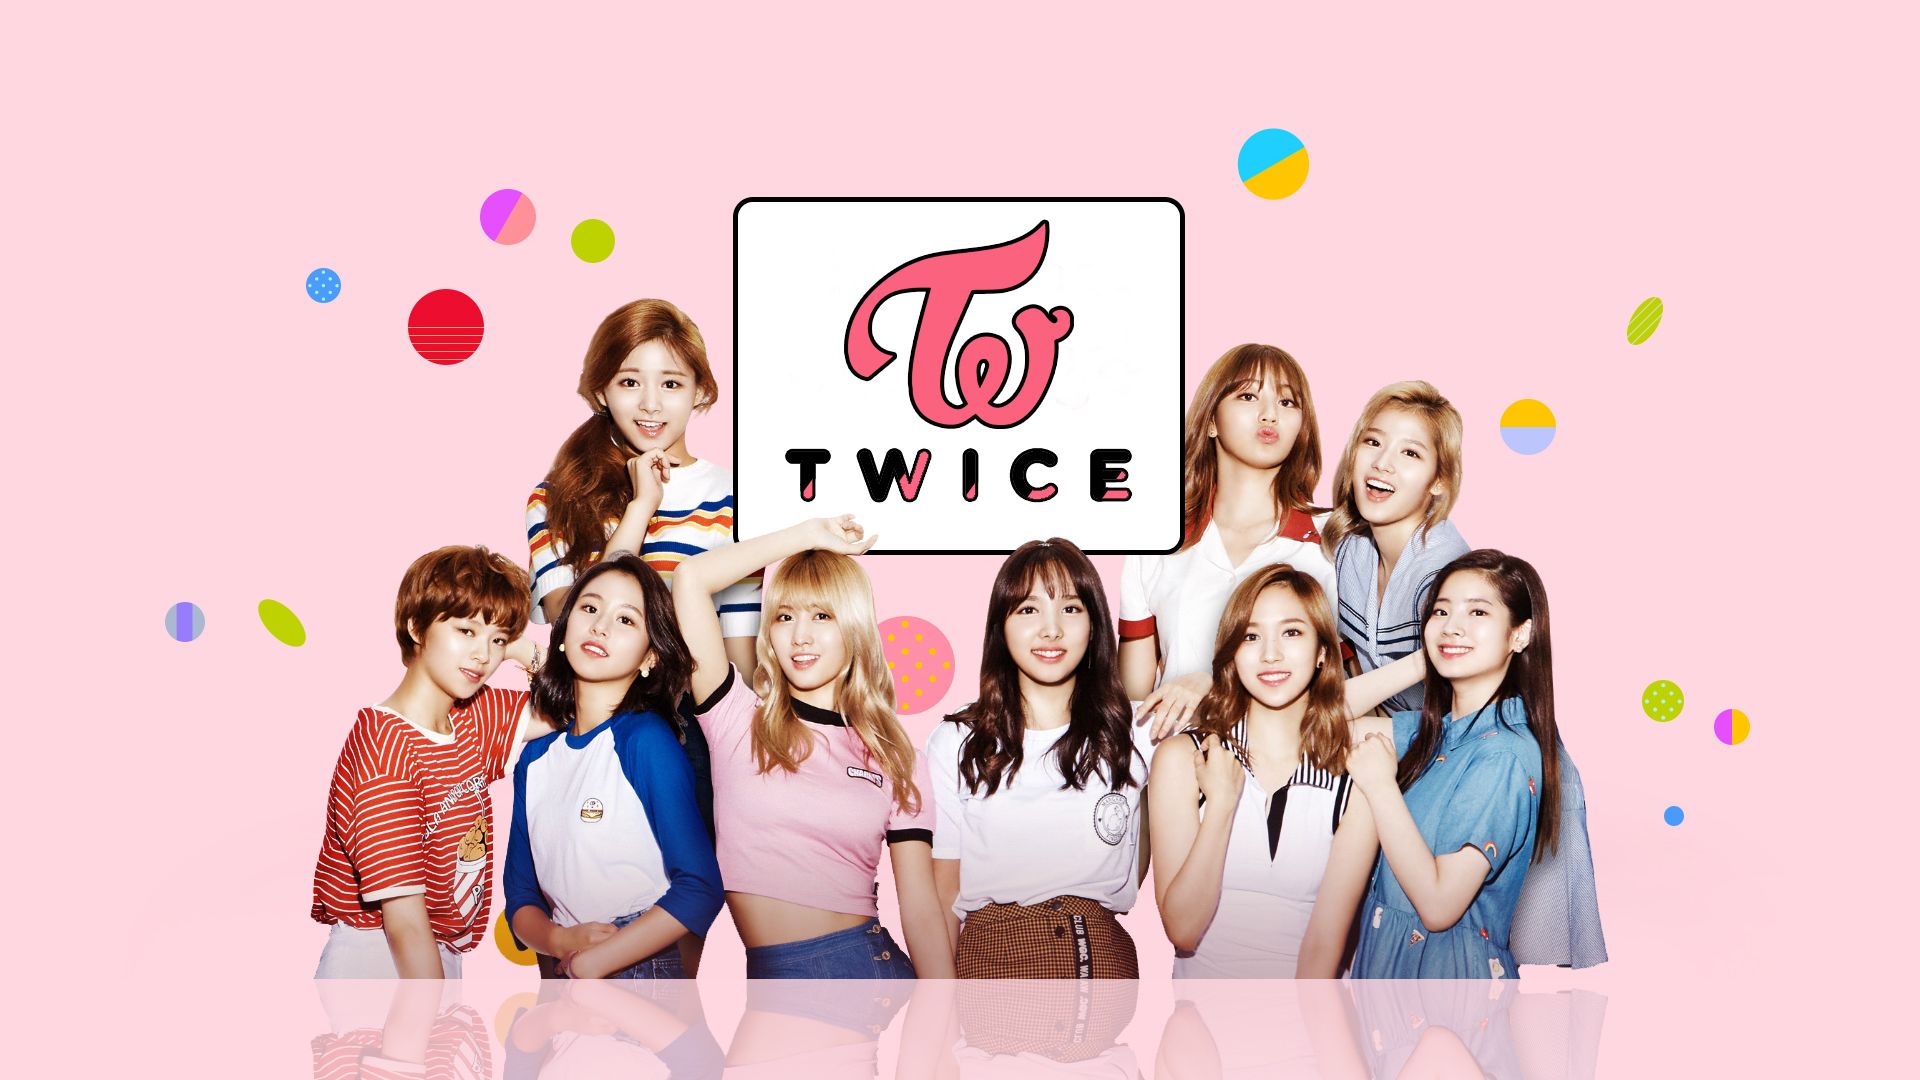 Twice Group Wallpaper for All Fans .supertabthemes.com